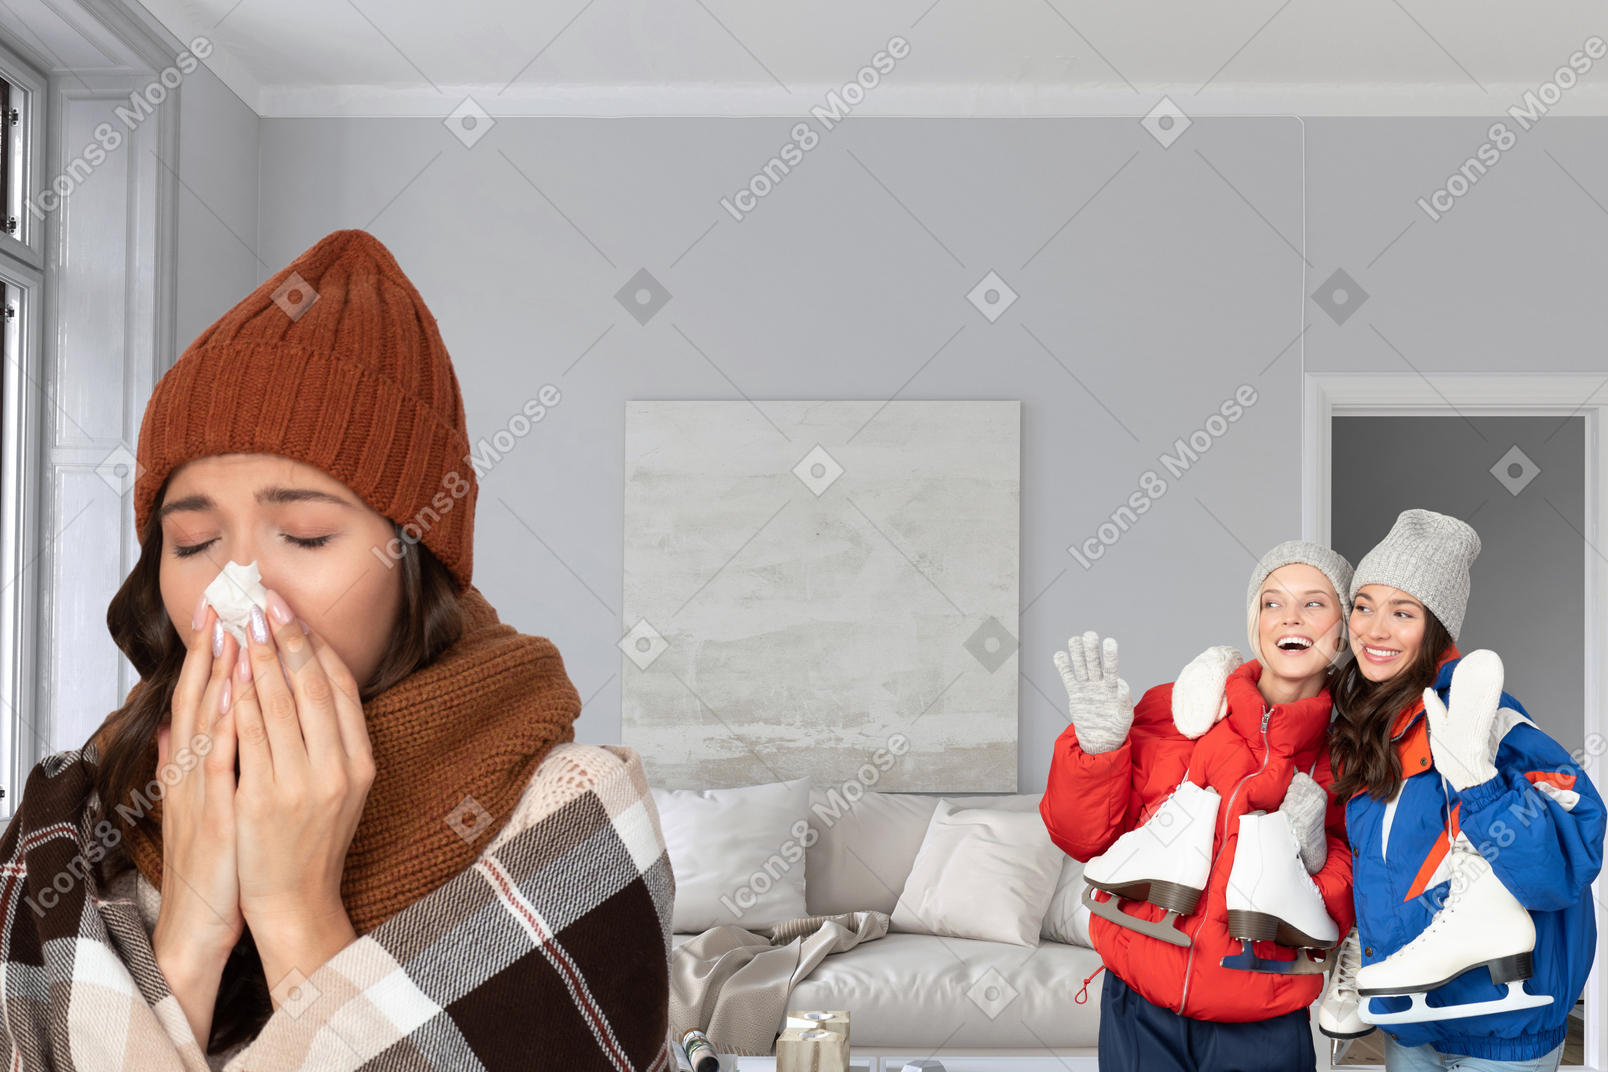 Woman blowing her nose next to two female friends